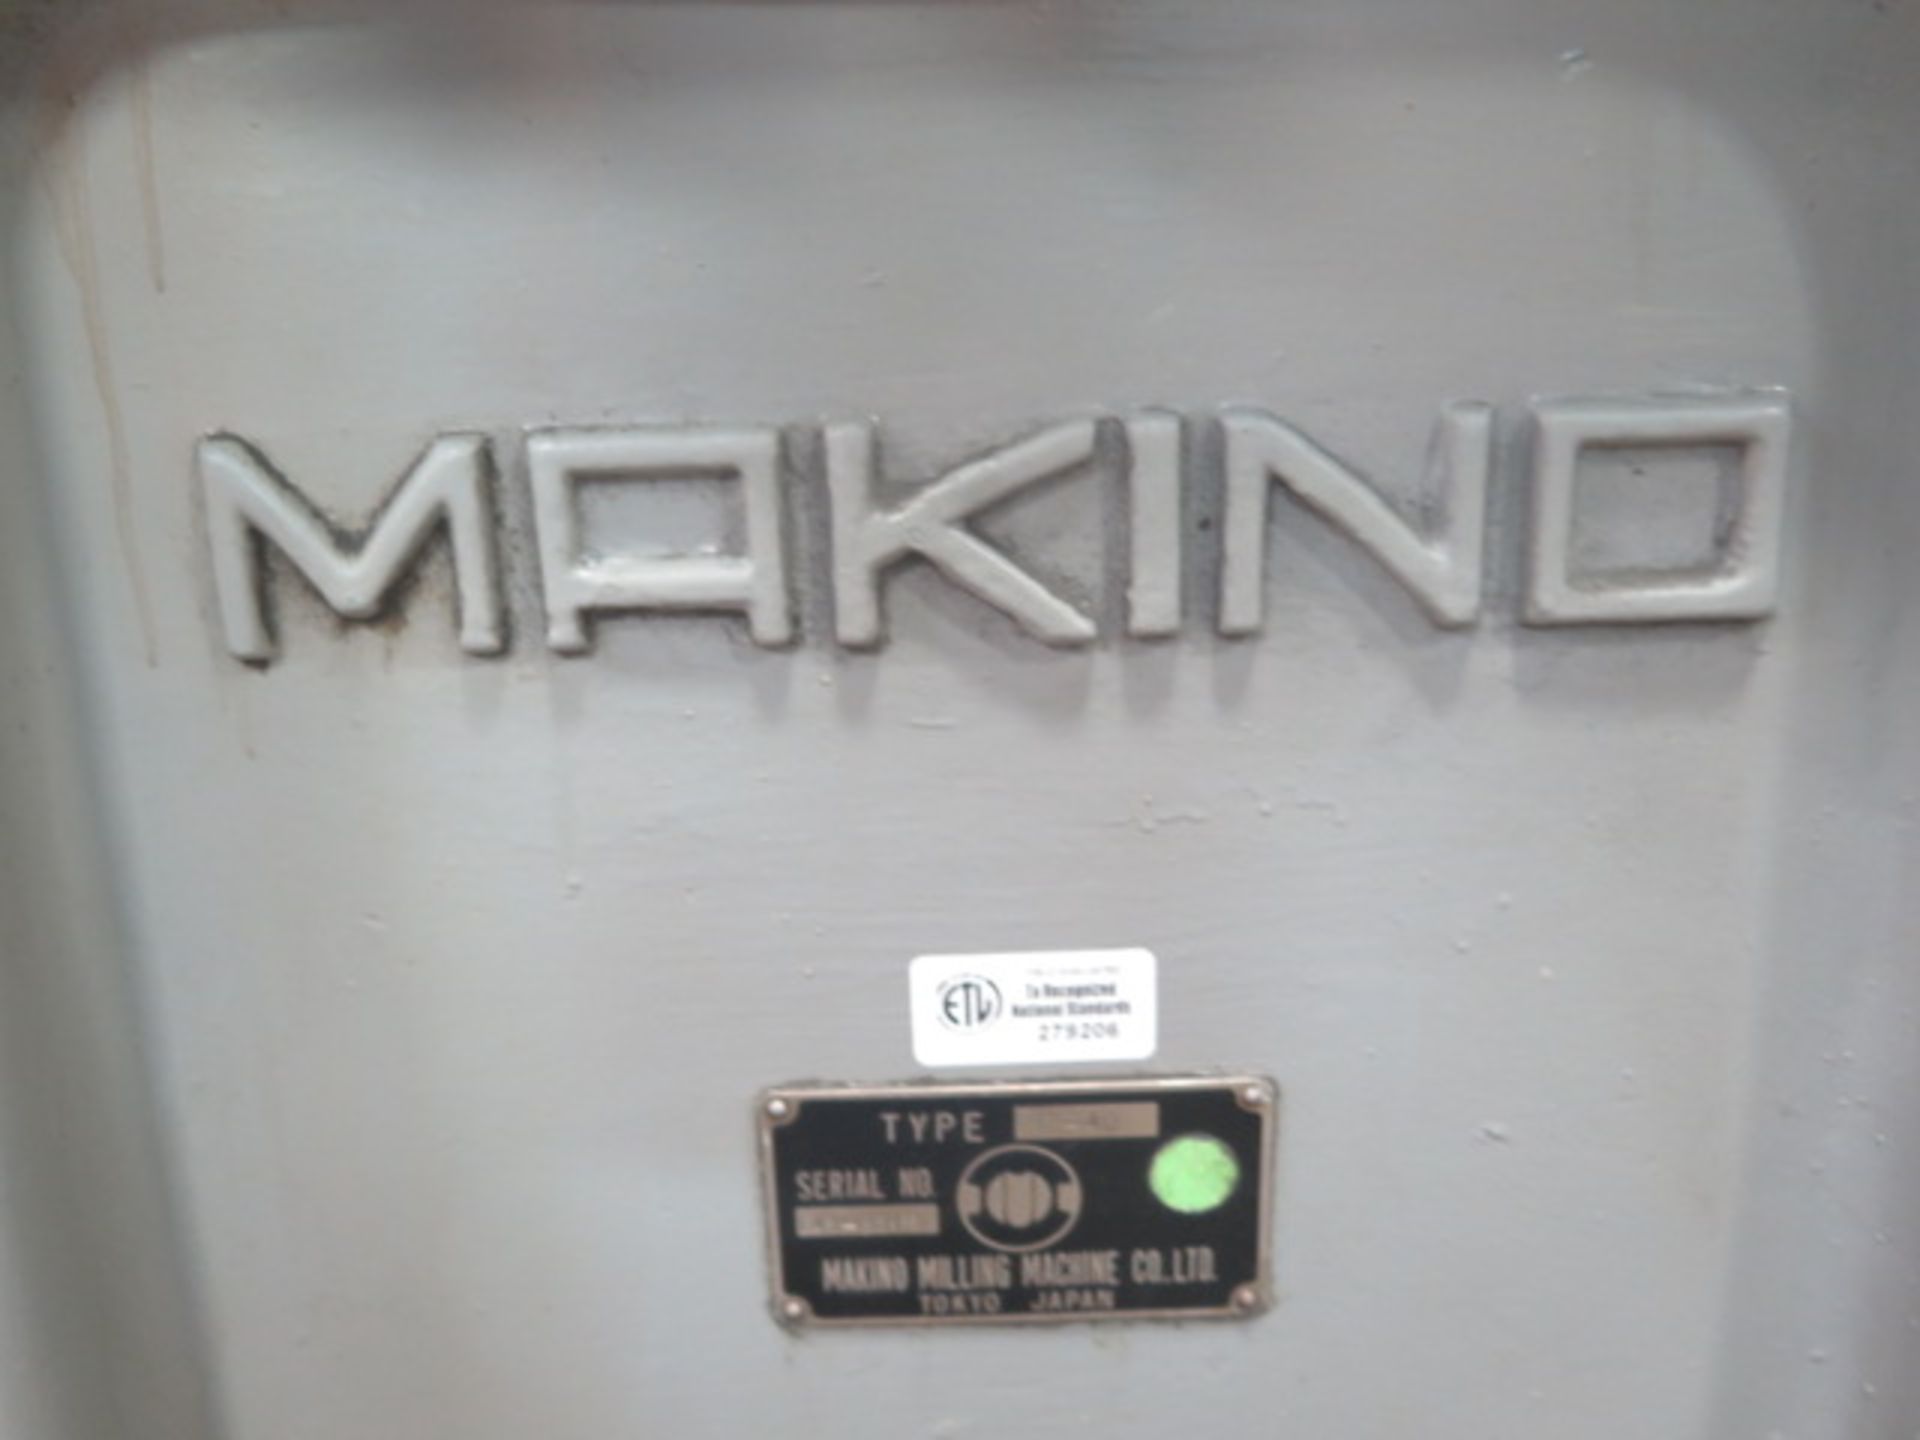 Makino C-40 Universal Tool and Cutter Grinder s/n E43-3018 w/ Compound Dual Wheel Grinding Head, - Image 6 of 6